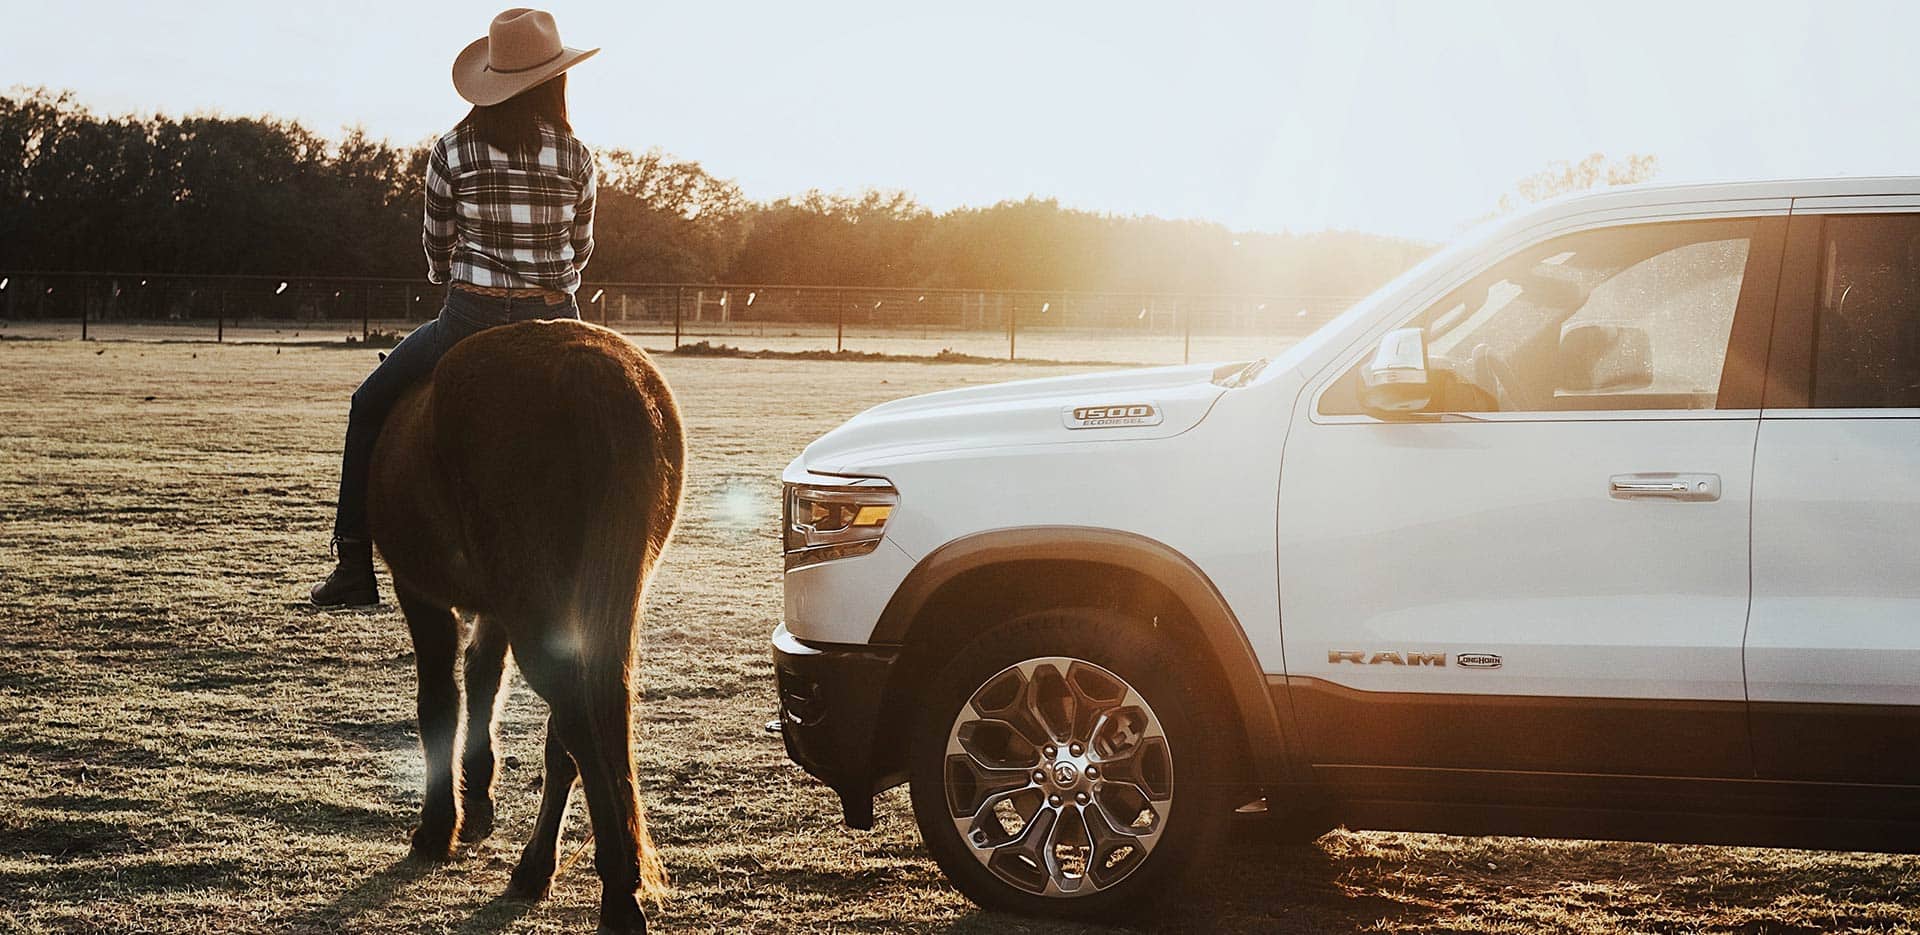 Display The 2023 Ram 1500 parked in a horse paddock with a woman on horseback beside it.